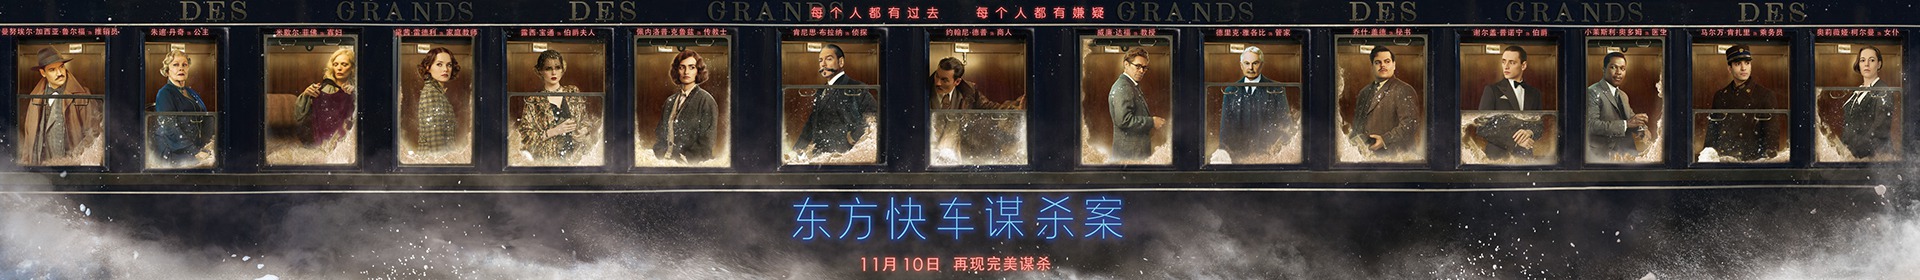 Extra Large Movie Poster Image for Murder on the Orient Express (#23 of 40)